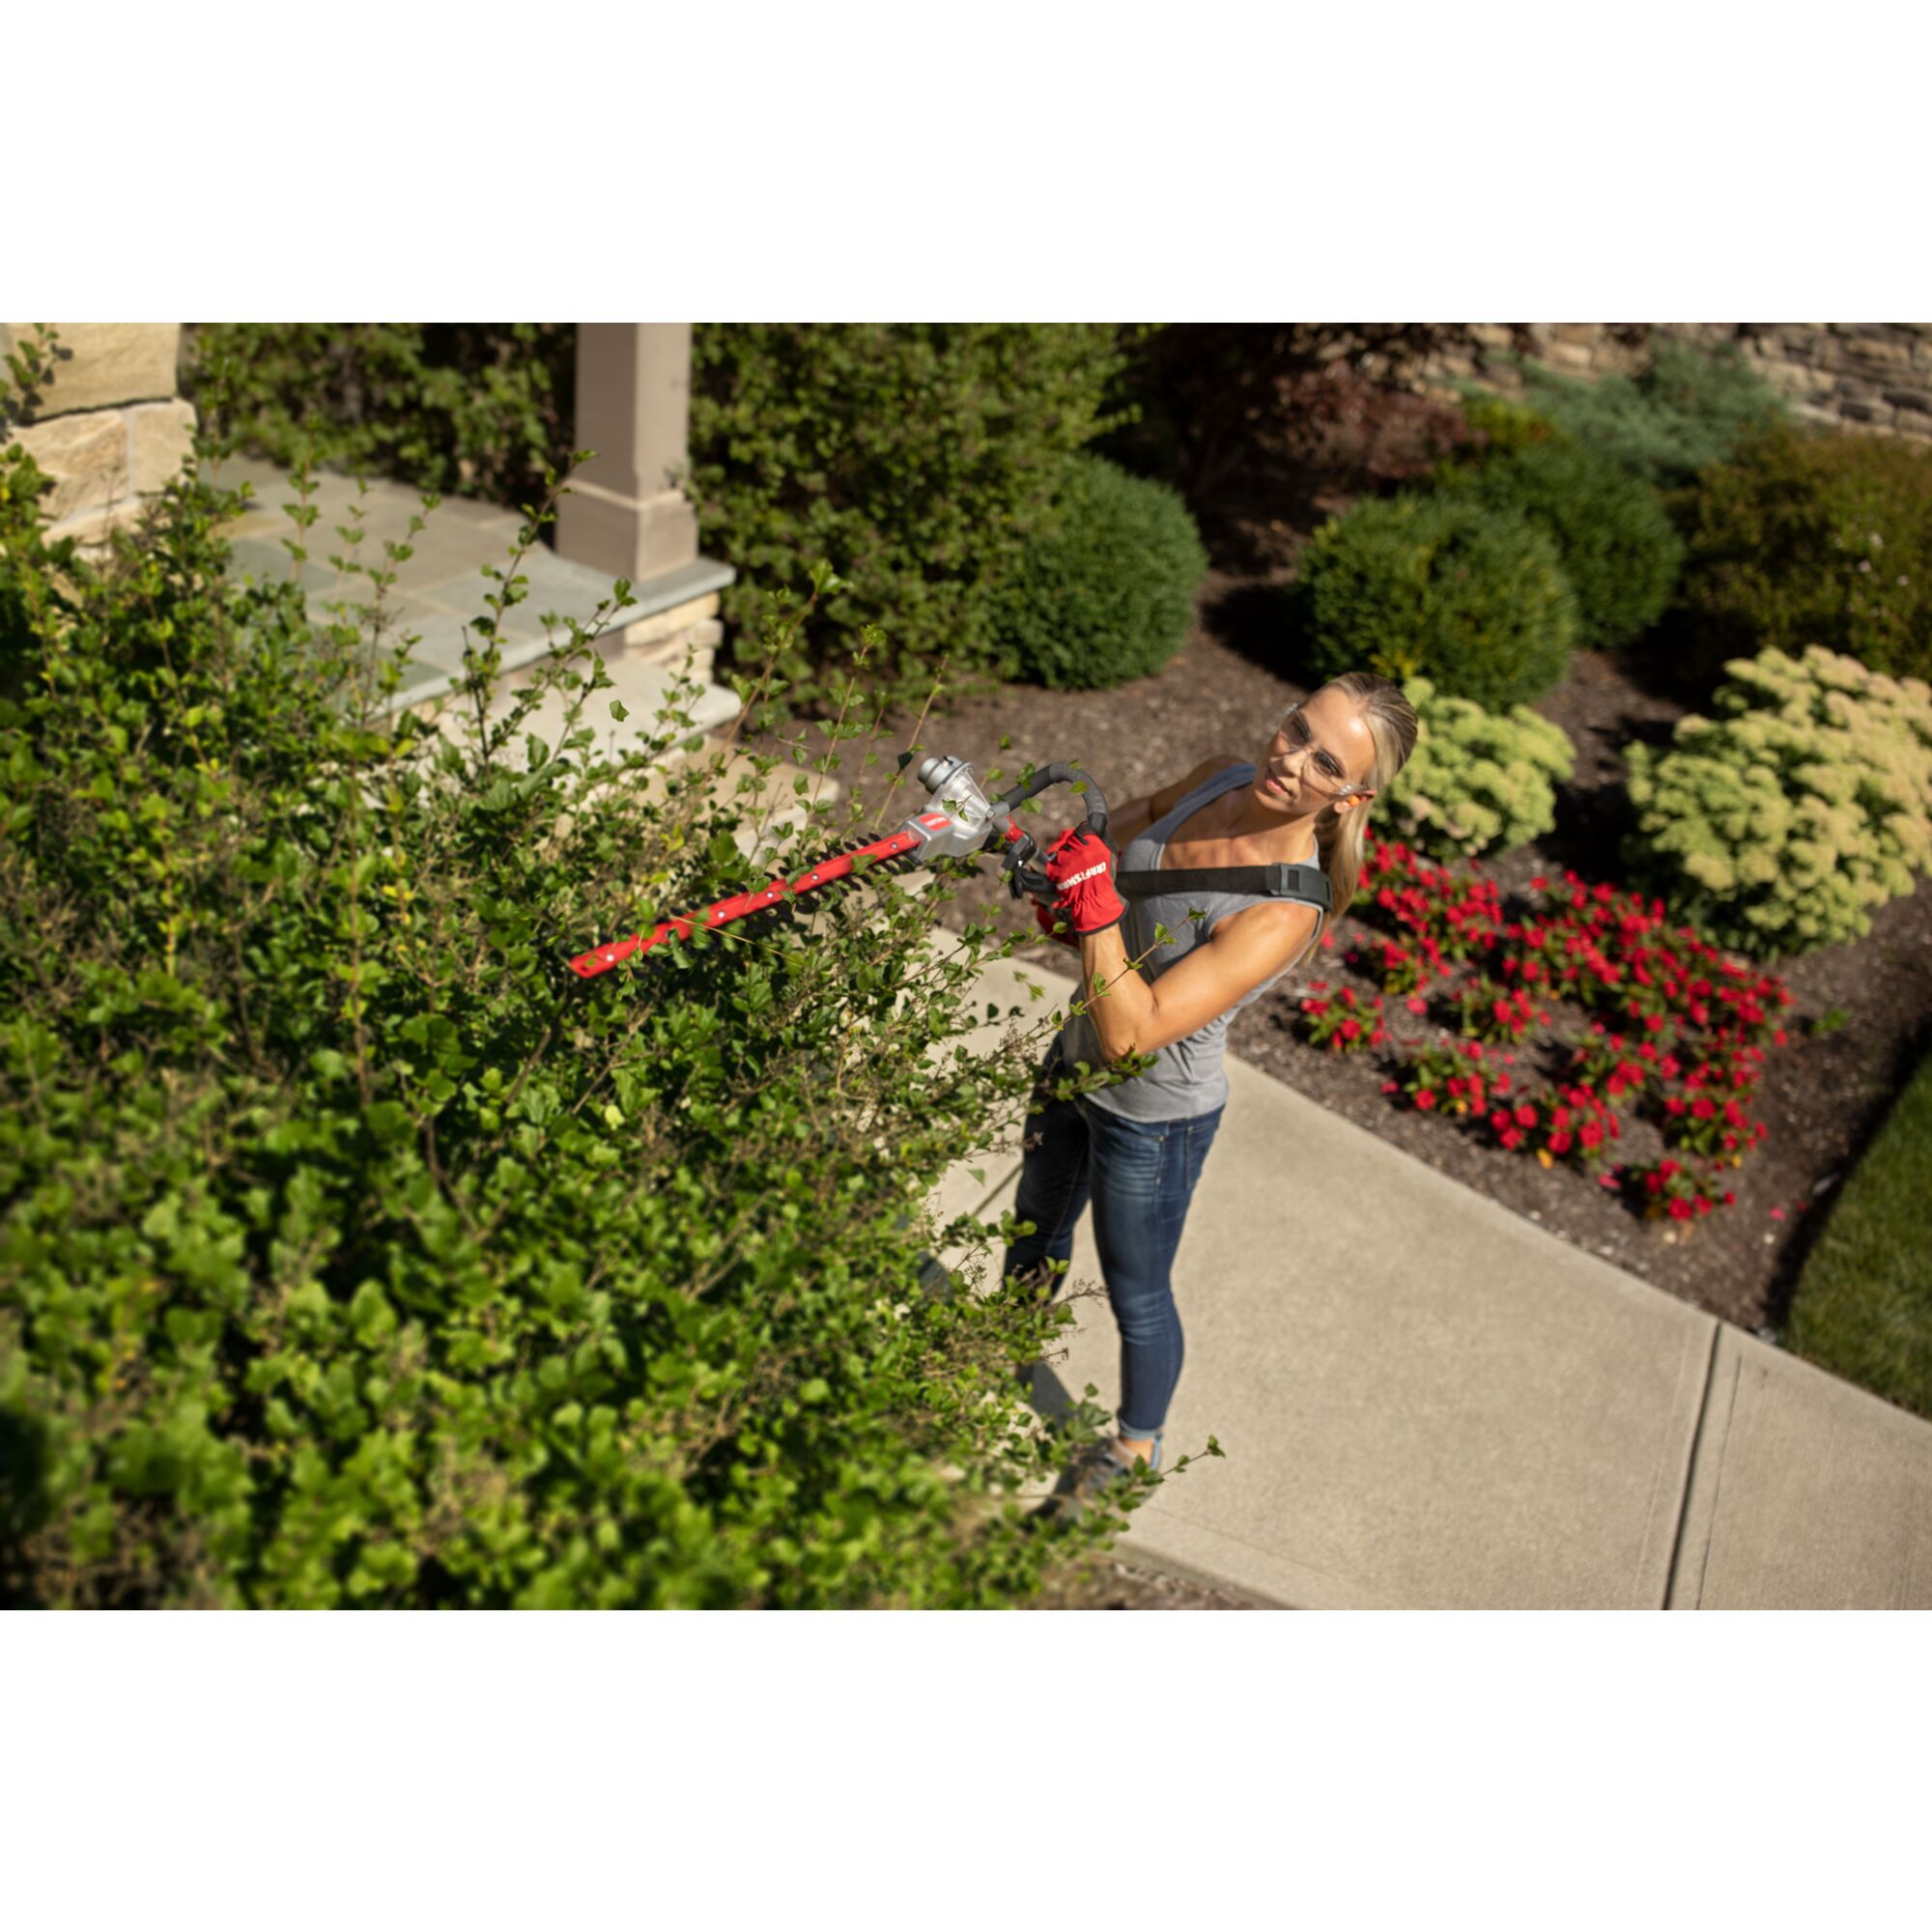 CRAFTSMAN HT2200 Gas Pole Hedge Trimmer trimming top of hedges wearing jeans and gray shirt